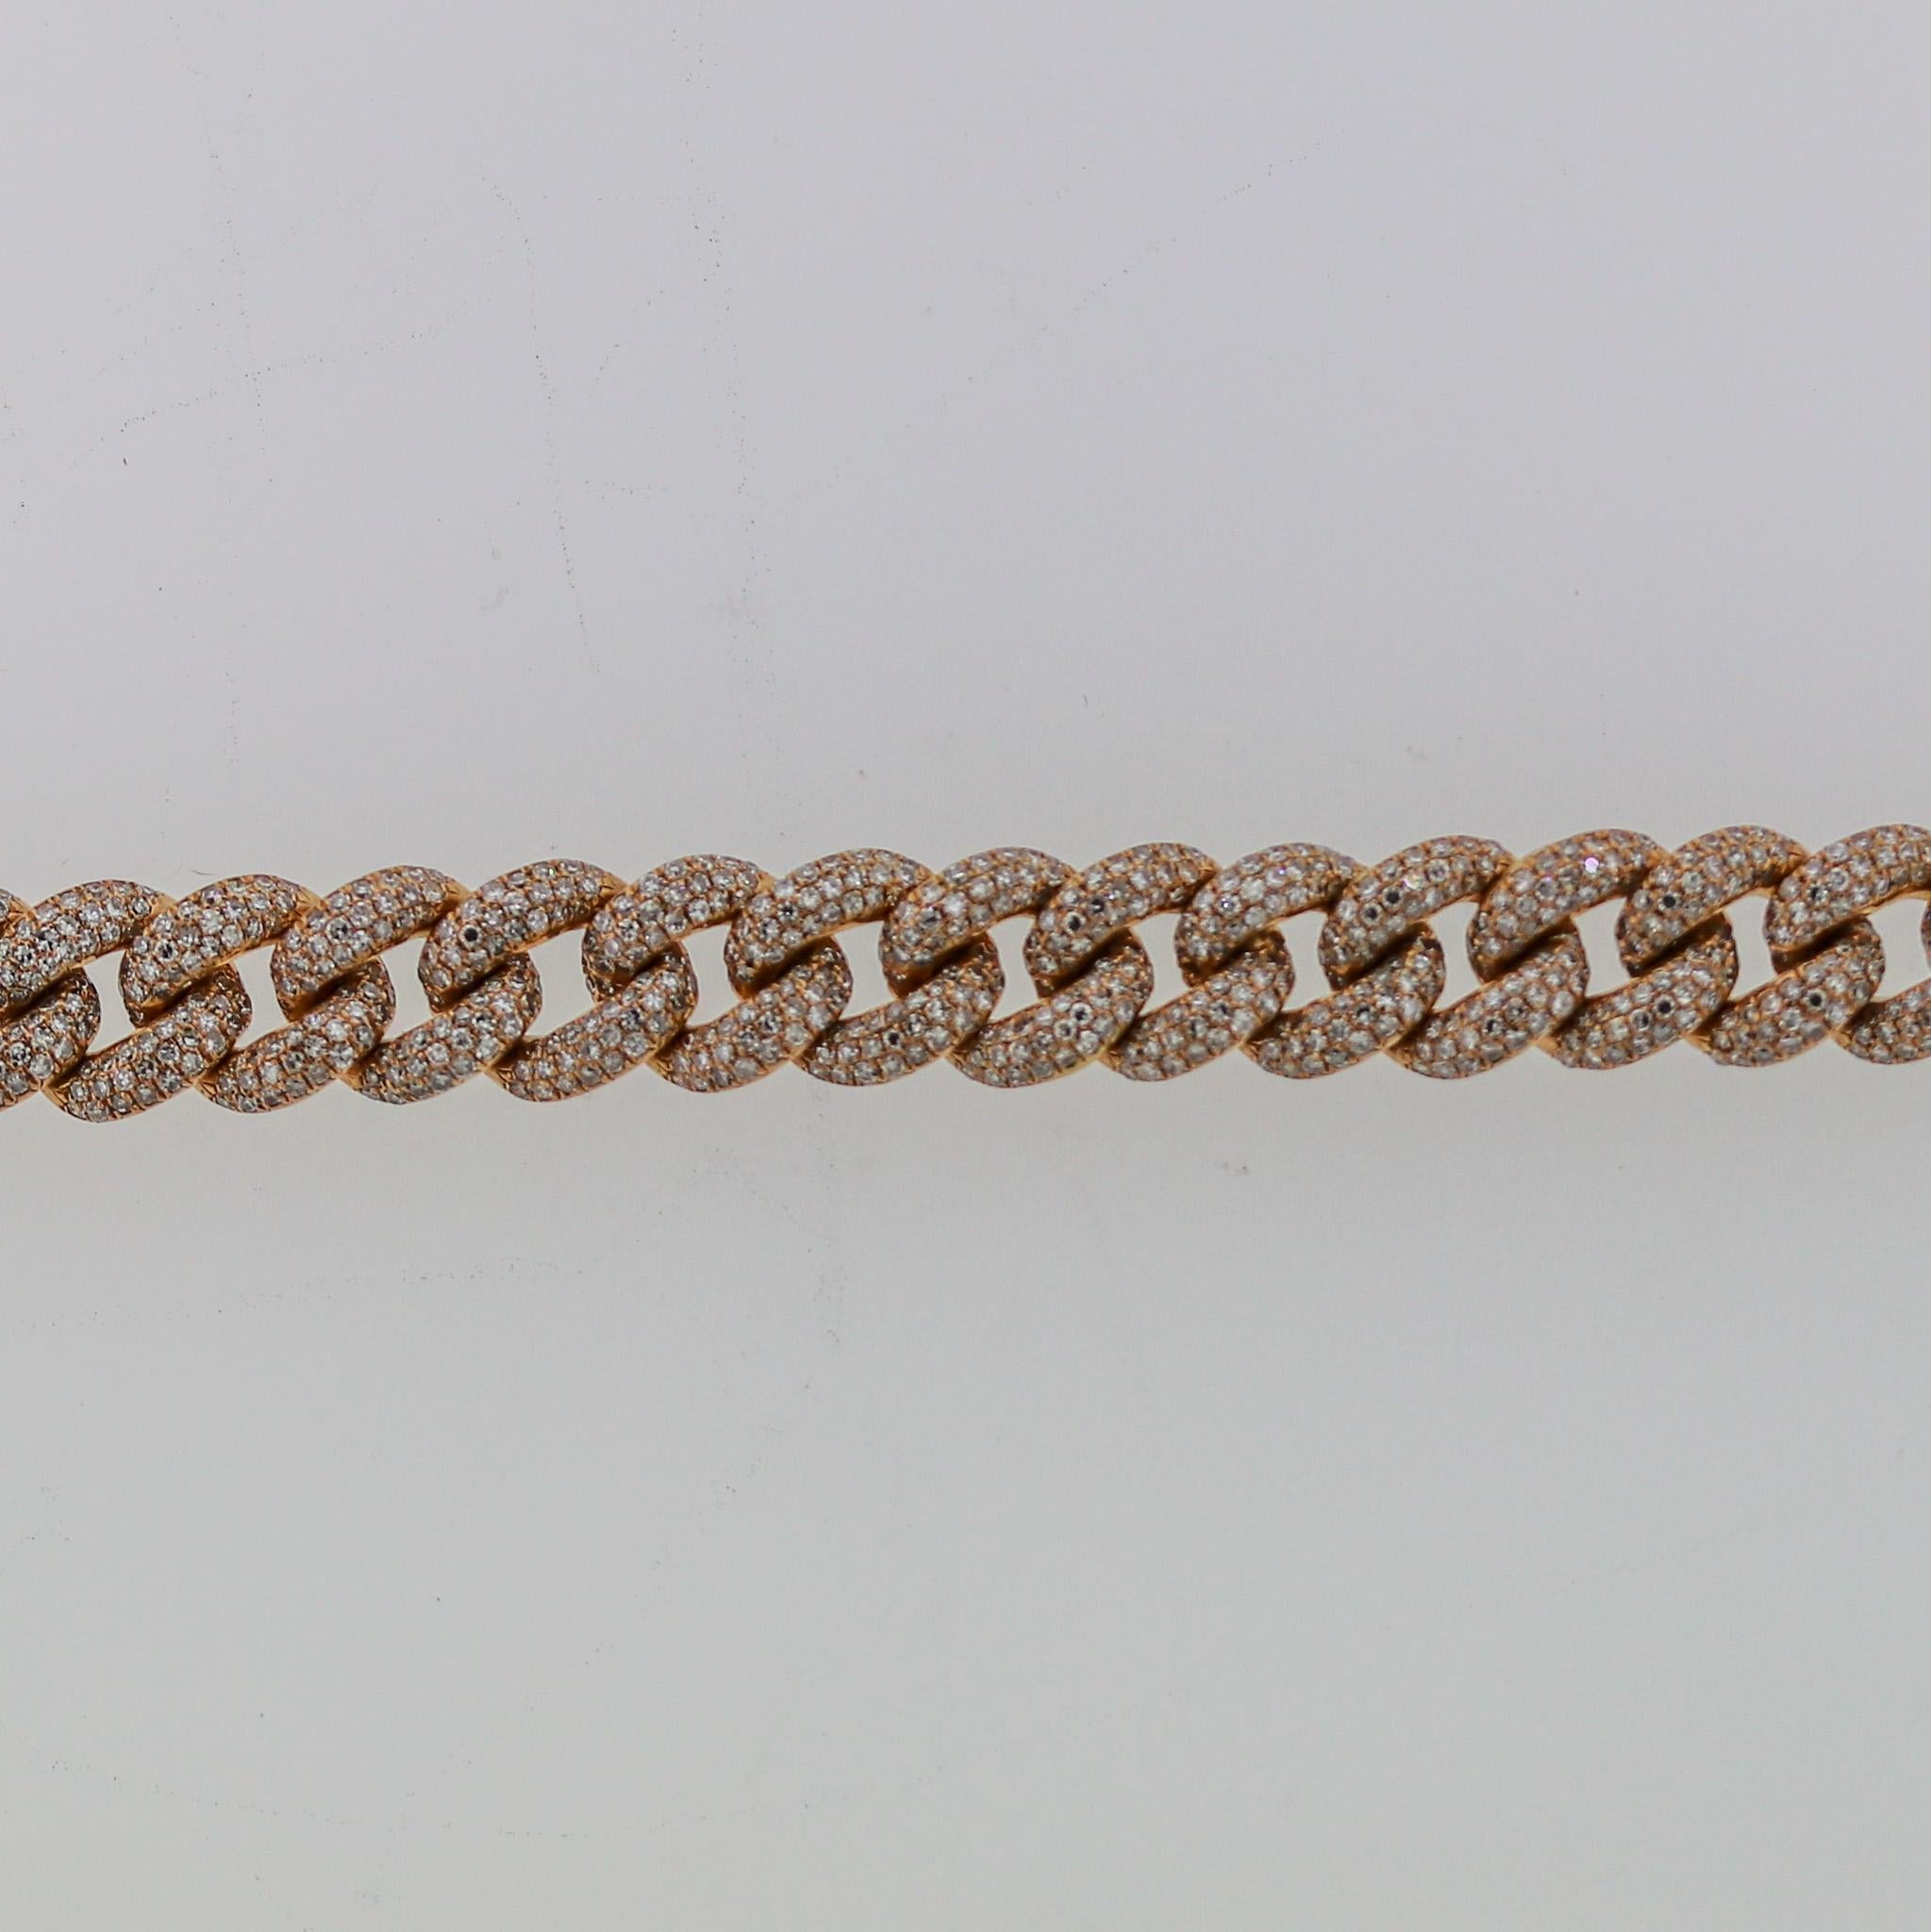 A traditional Cuban link chain bracelet in rose gold featuring 7.80 carats of pave-set diamonds covering each and every link. Made in 18k gold and ready to be worn.

Length: 7 inches

Weight: 28.3 grams